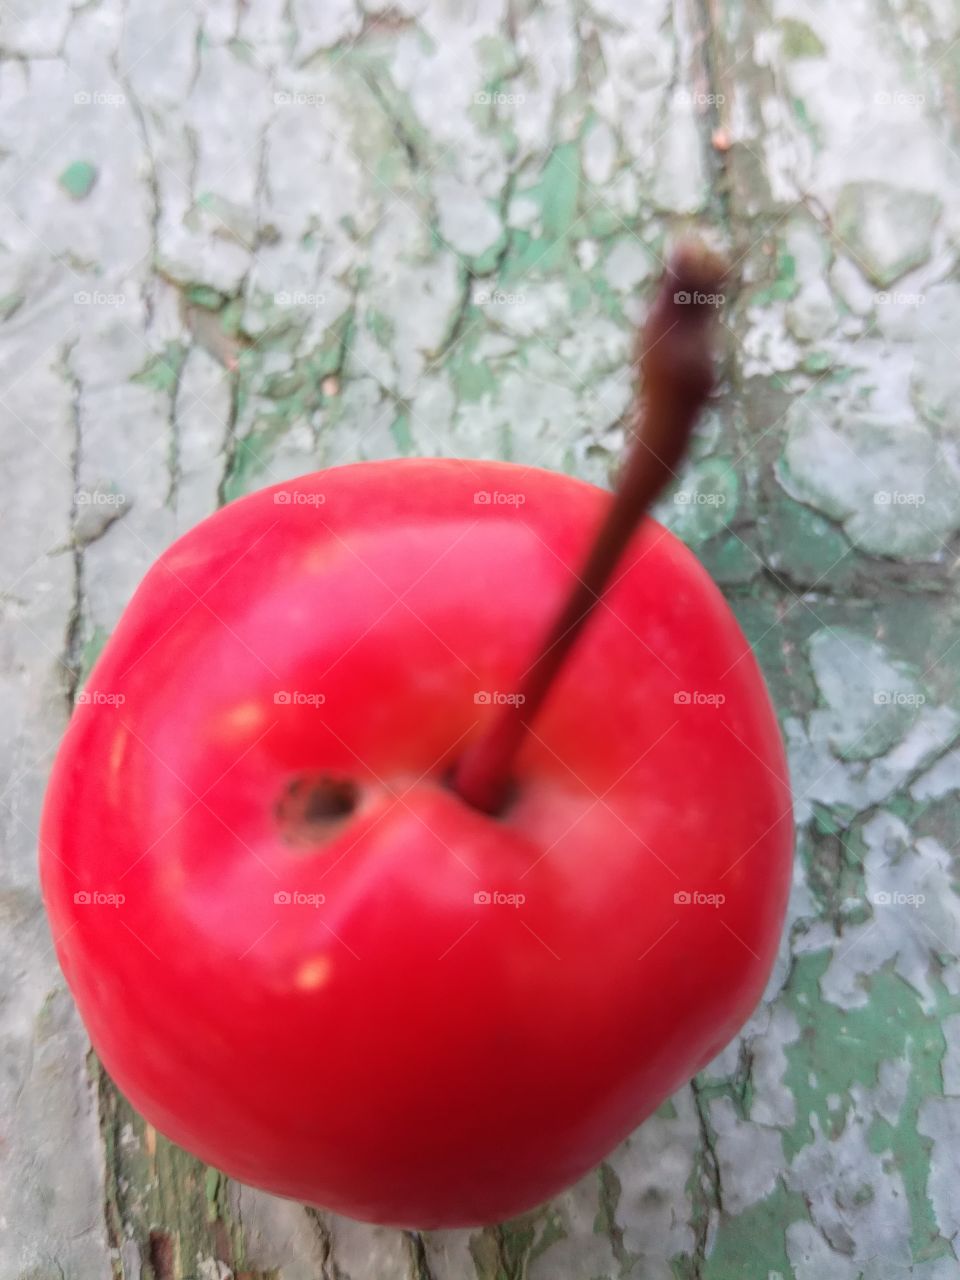 Red apple 3